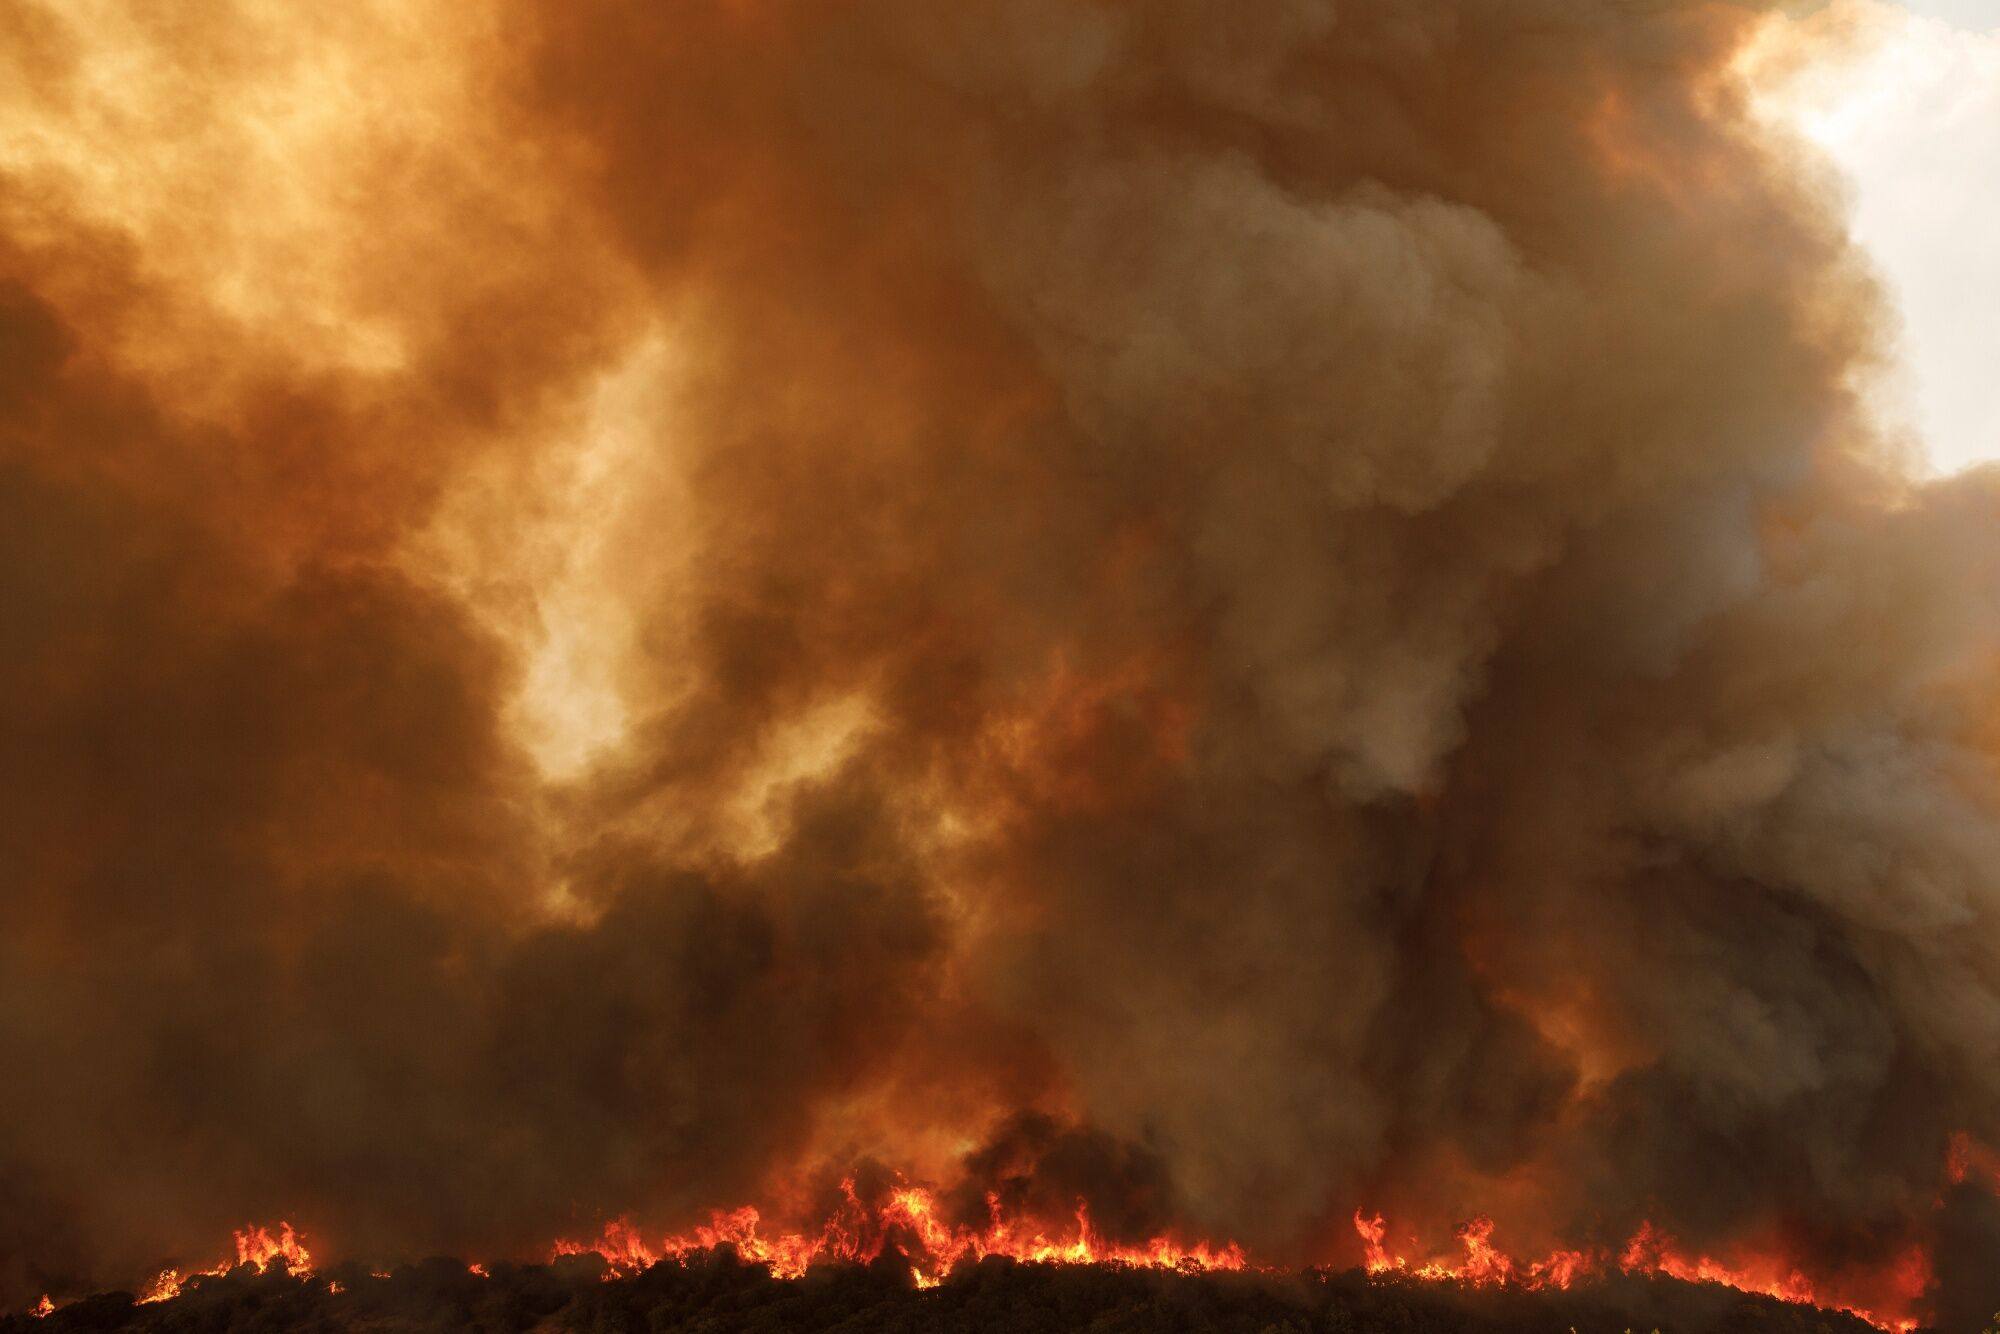 A wildfire burns near the village of Sikorrachi, west of Alexandroupolis, Greece, on Wednesday. Photo: Bloomberg